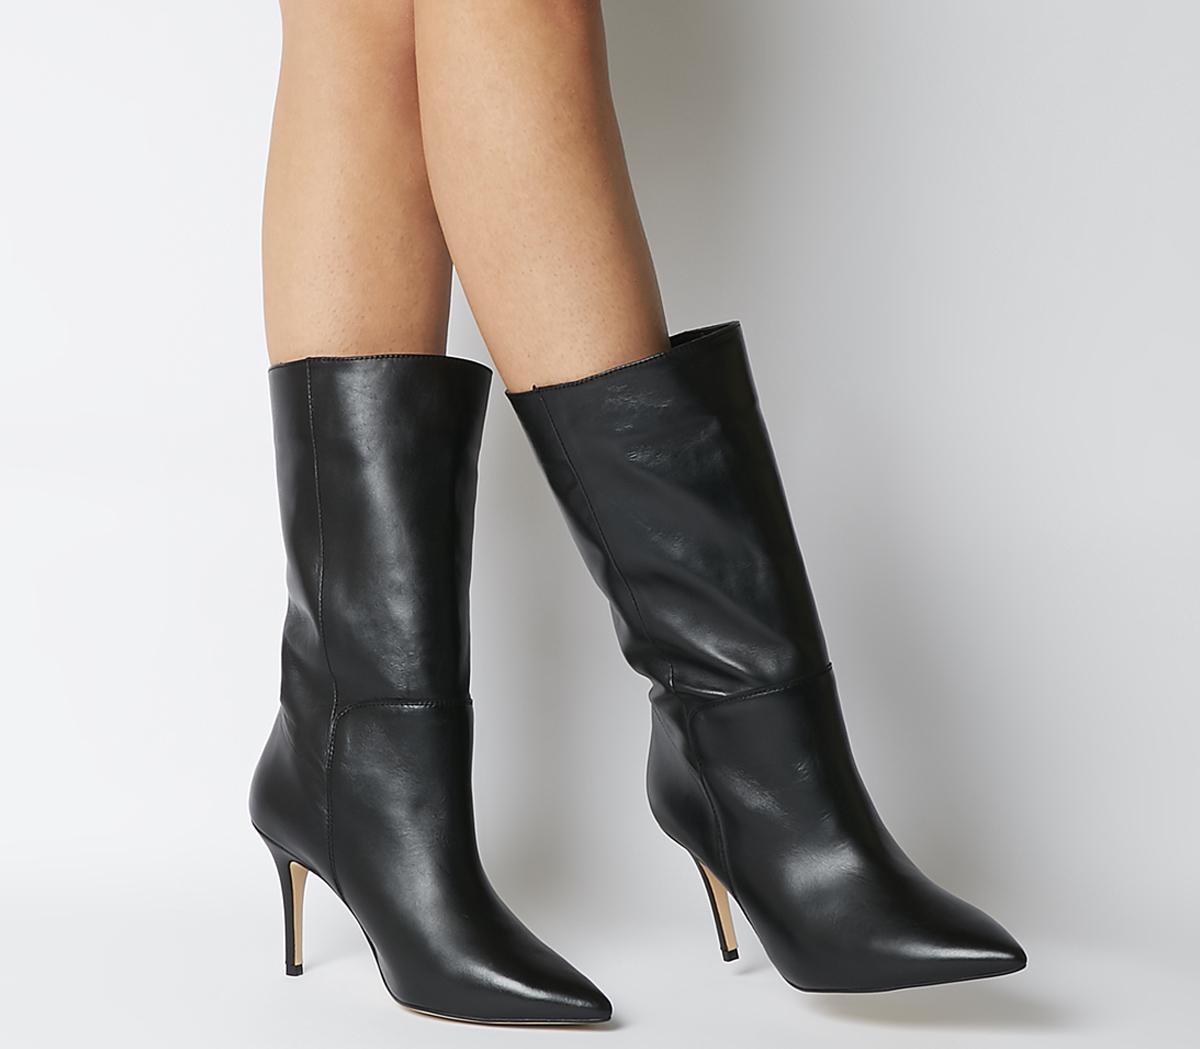 ladies black leather calf length boots